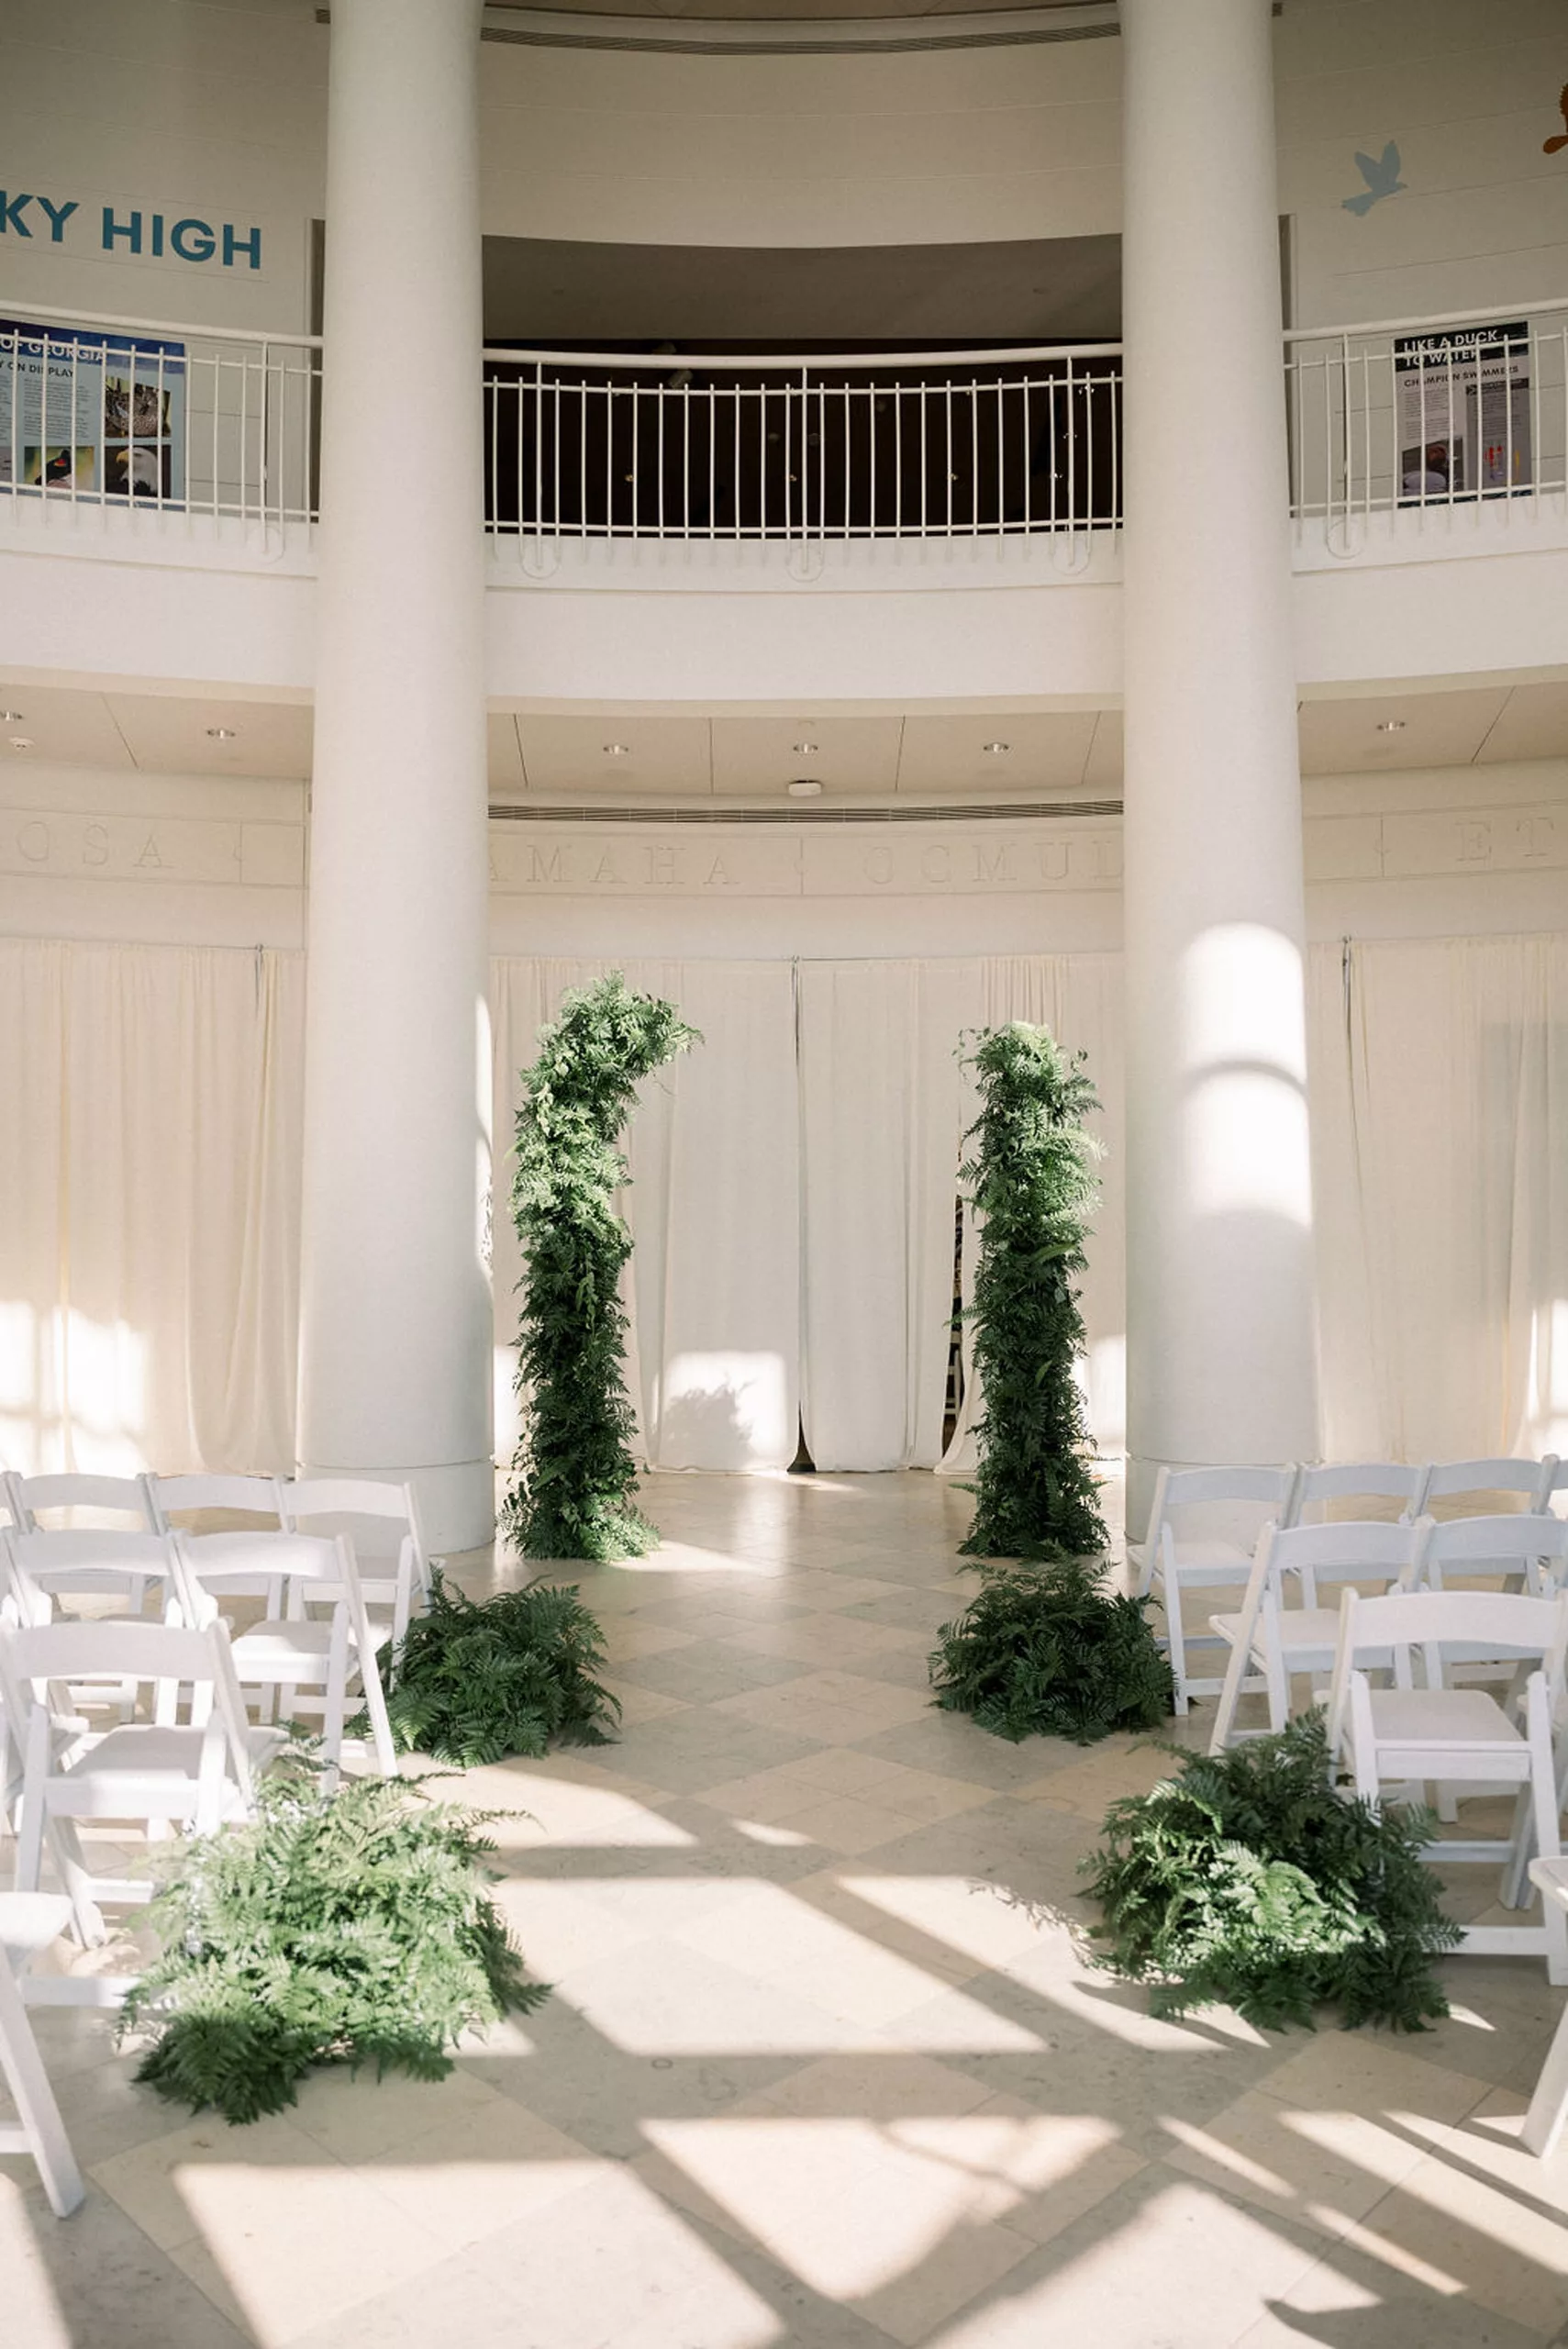 Details of a wedding ceremony setup with white chairs and ferns for decorations